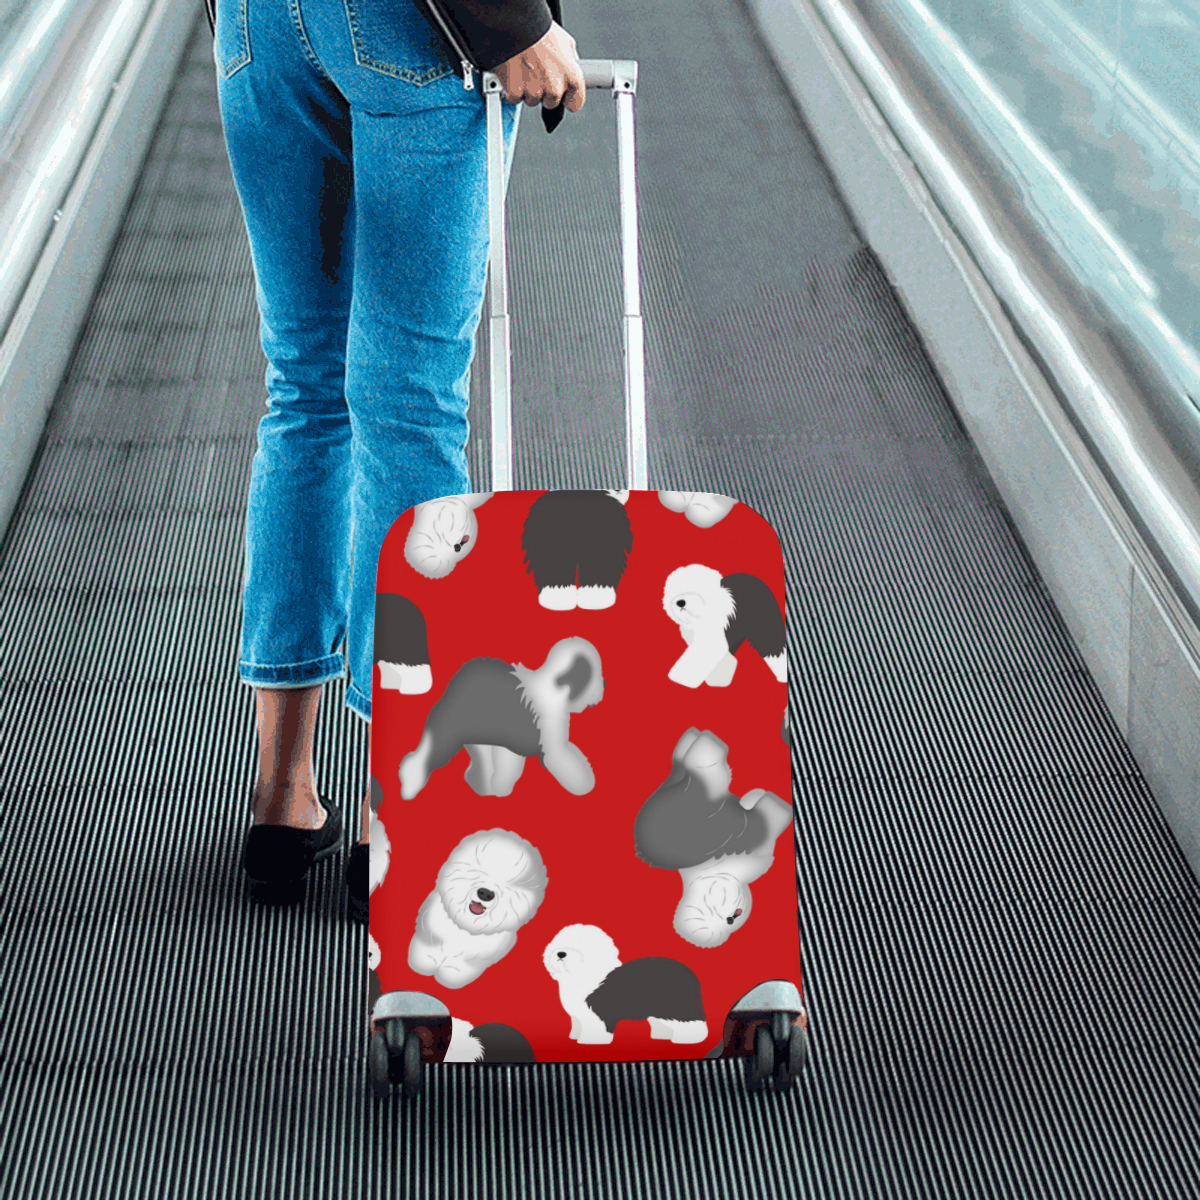 Multi Sheepies Luggage Cover/Small 18"-21"